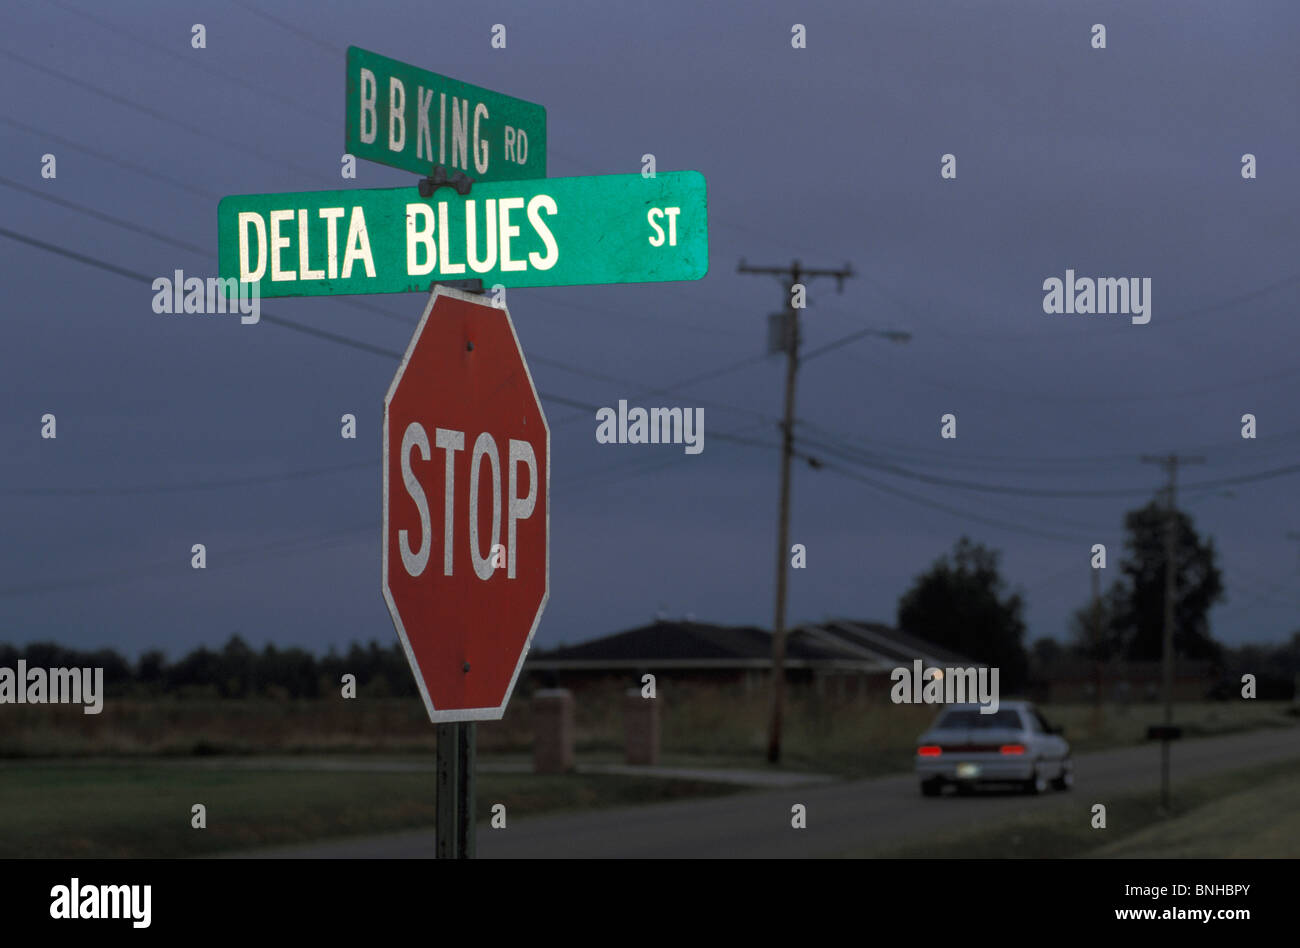 Usa Indianola Mississippi Bb King Stop Sign Delta Blues Culture Signs Traffic Sign Car Rural Dusk Road Music United States of Stock Photo